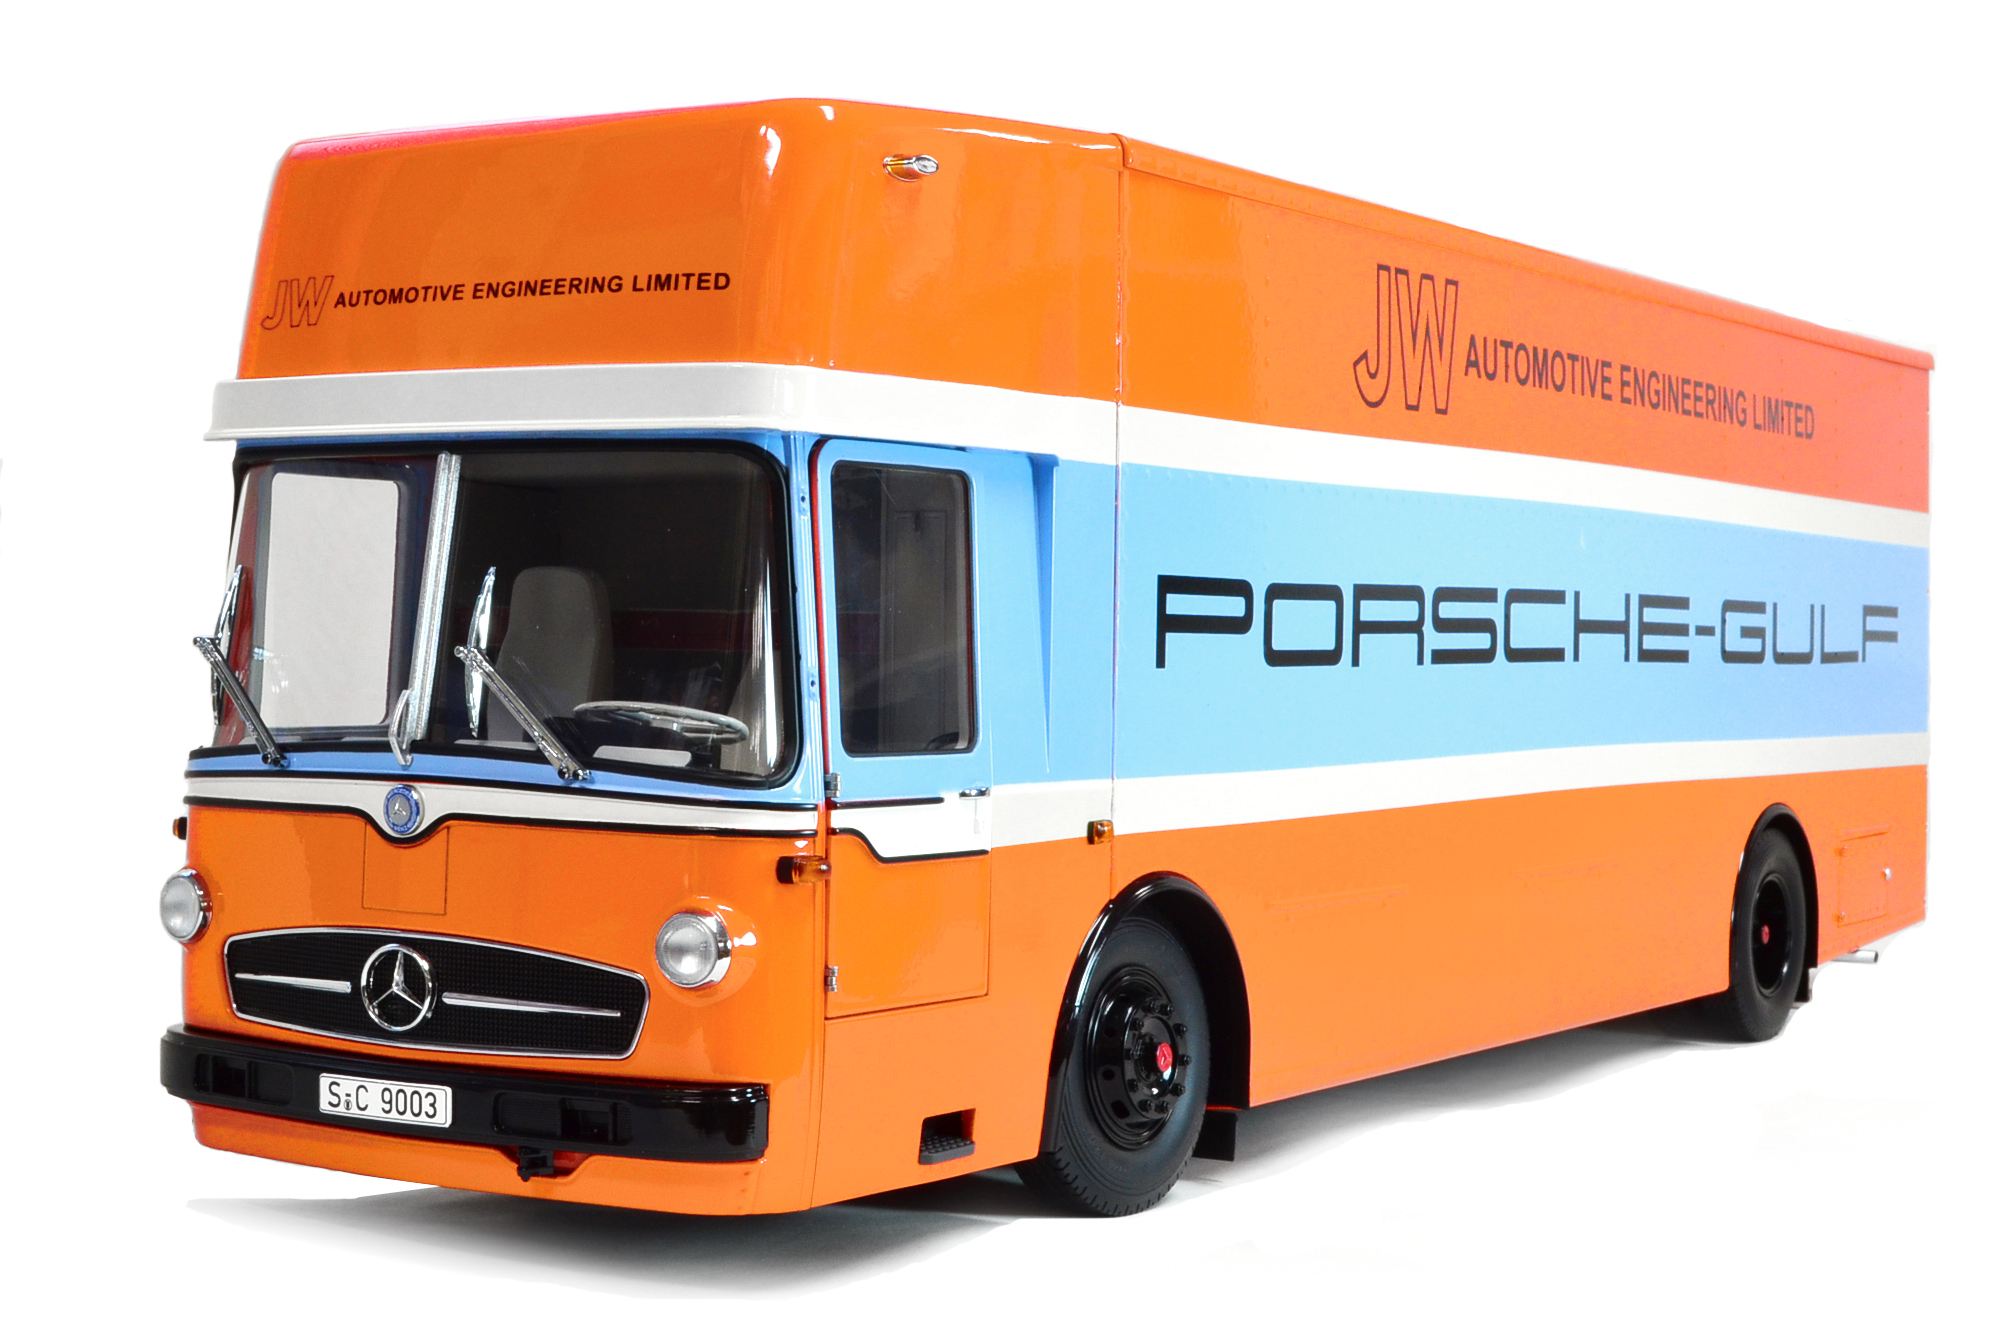 1968 Mercedes-Benz Gulf Racing Truck by Schuco exclusively for CK Modelcars (1:18 scale)